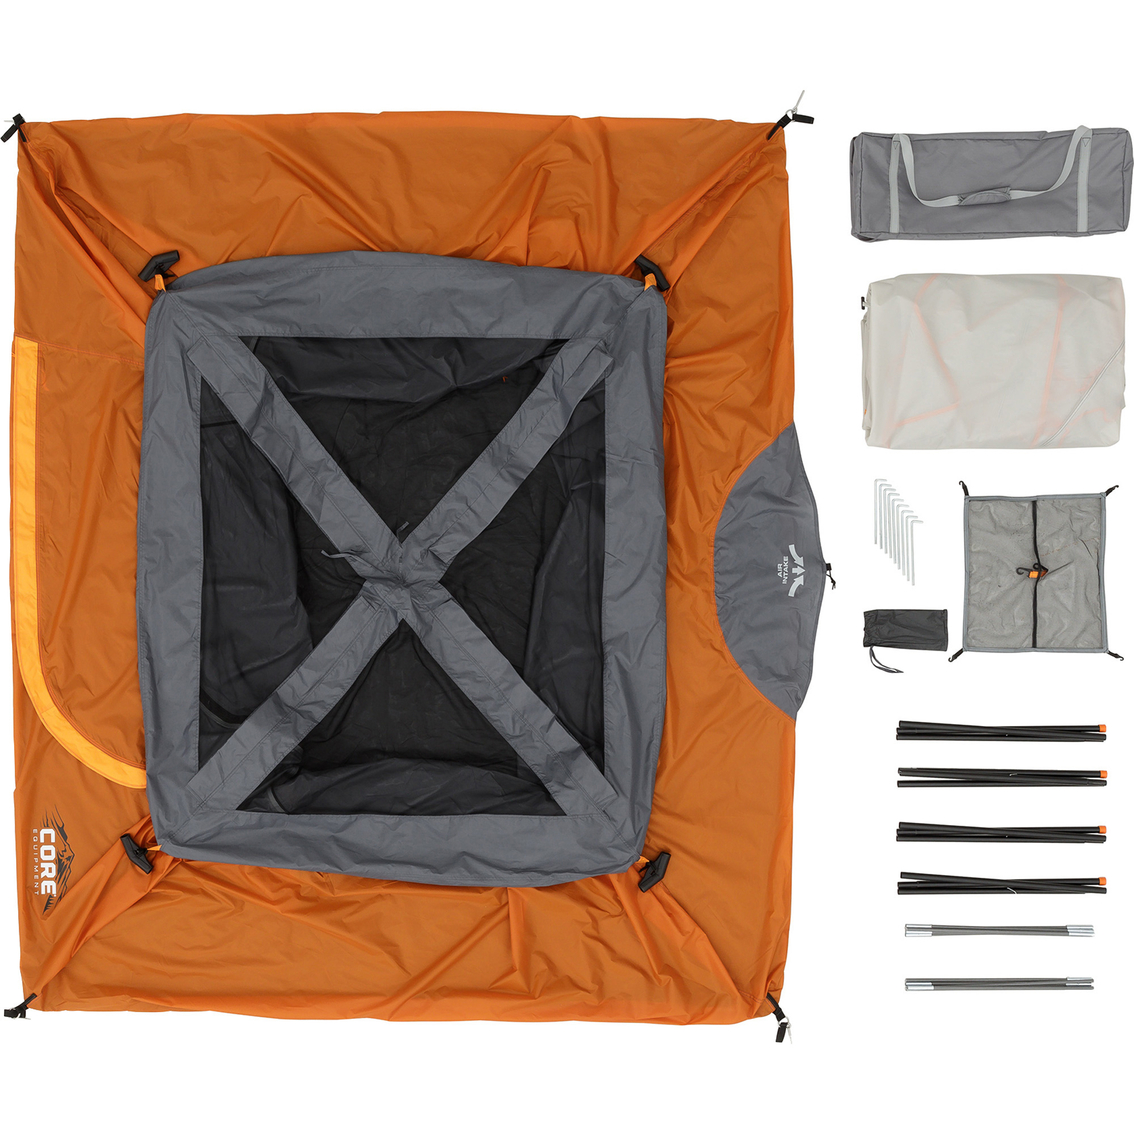 Core Equipment 4 Person Straight Wall Cabin Tent - Image 3 of 10